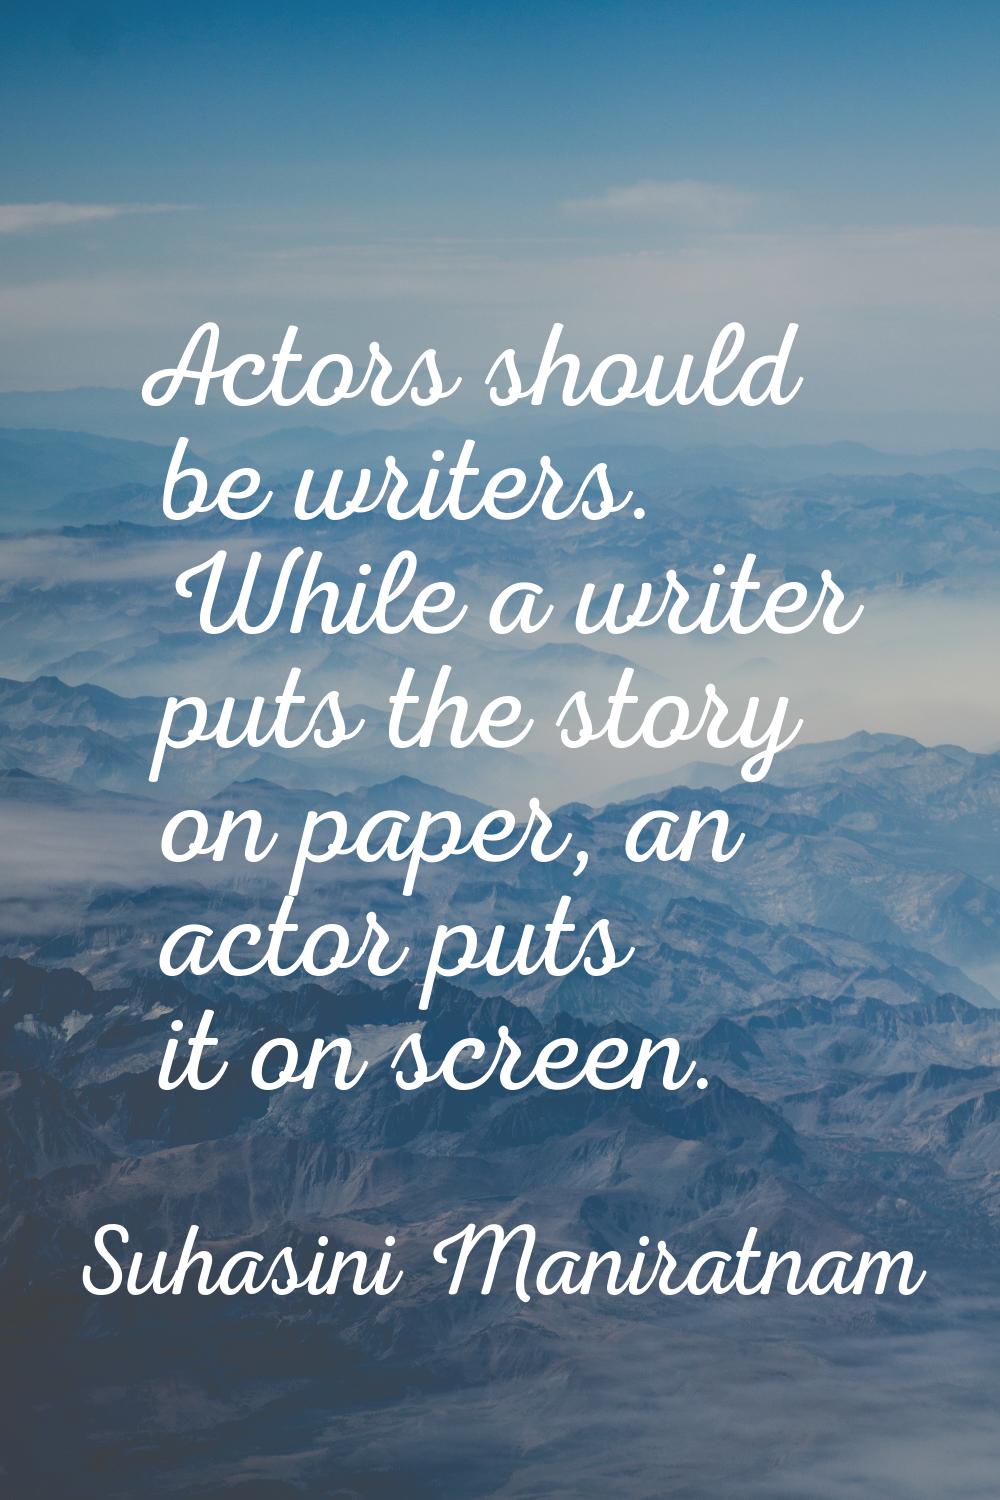 Actors should be writers. While a writer puts the story on paper, an actor puts it on screen.